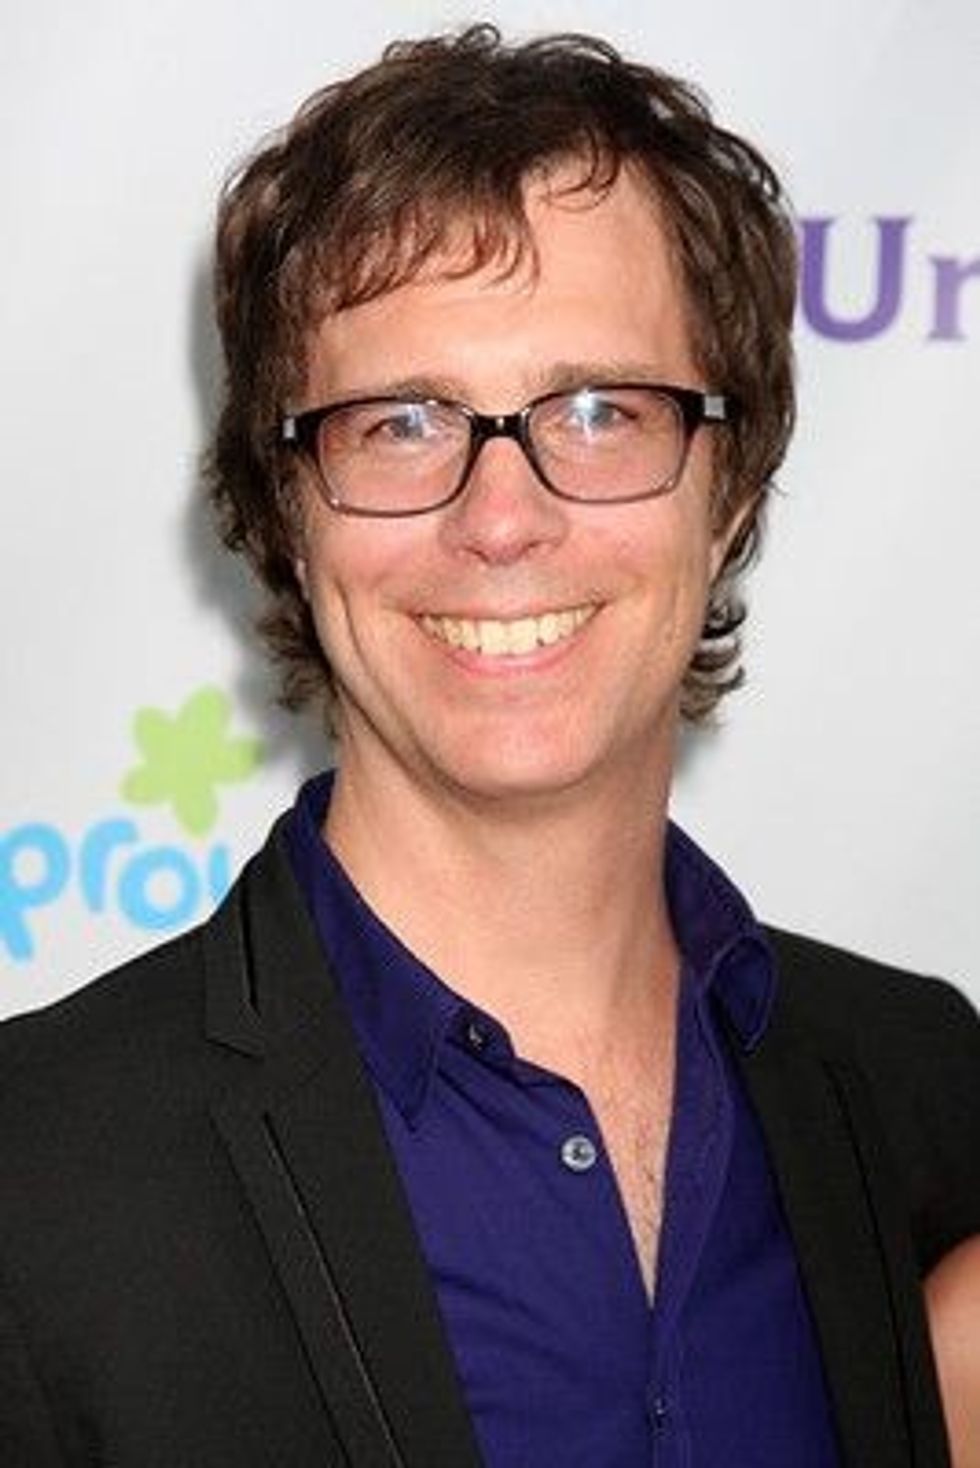 Ben Folds was a famous solo artist and a pianist in the USA during the '90s